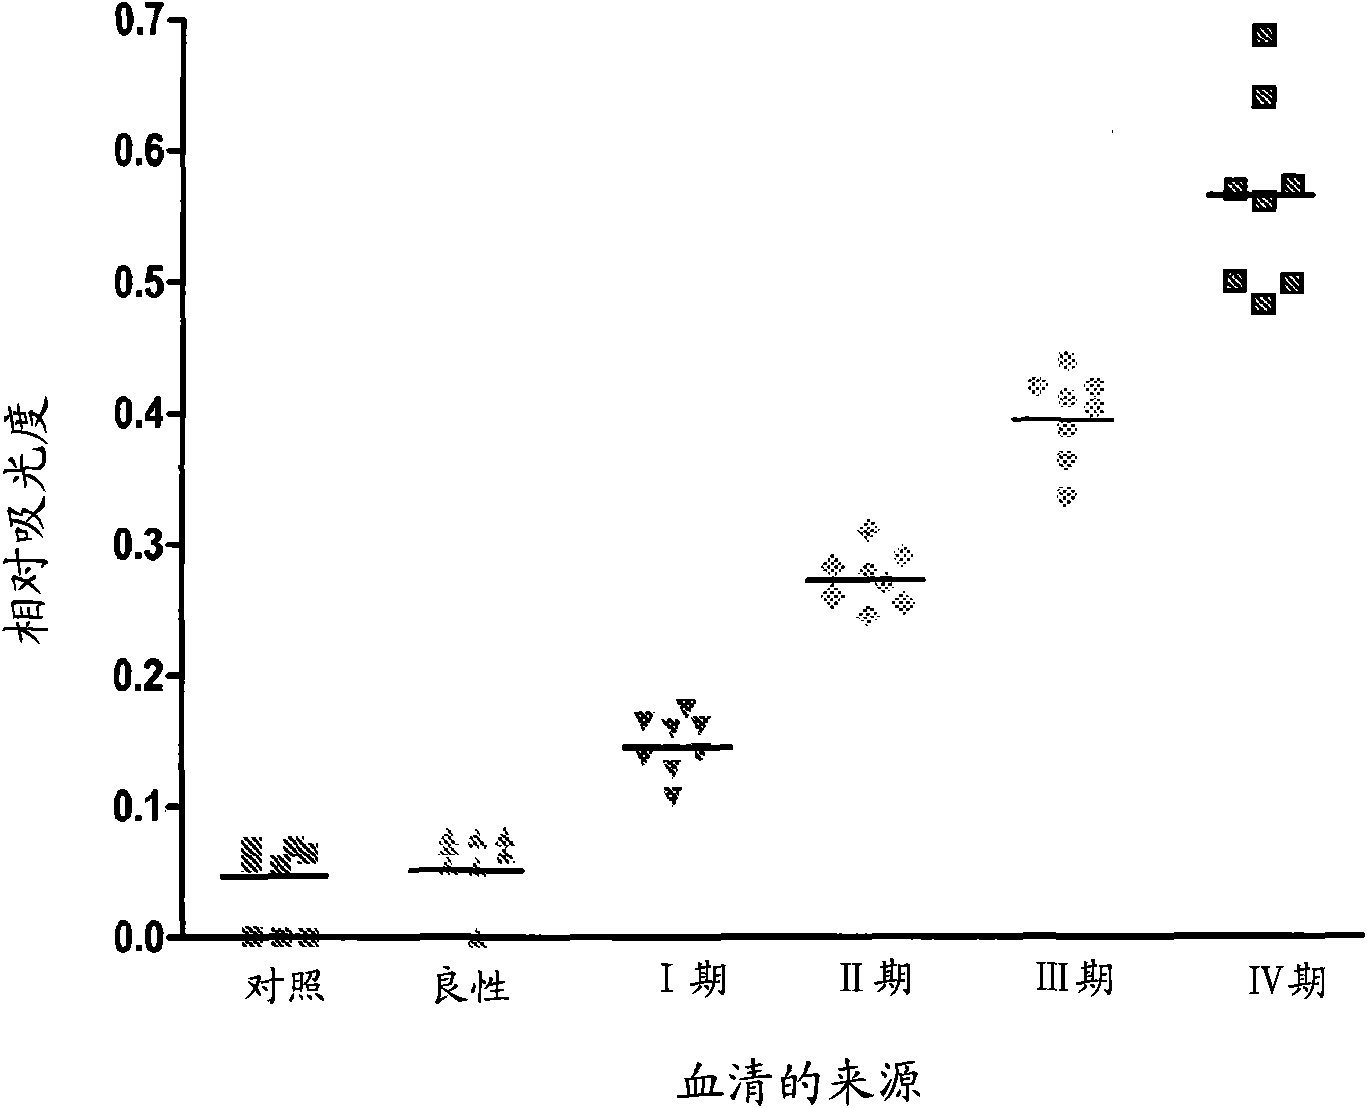 Methods of detecting autoantibodies for diagnosing and characterizing disorders